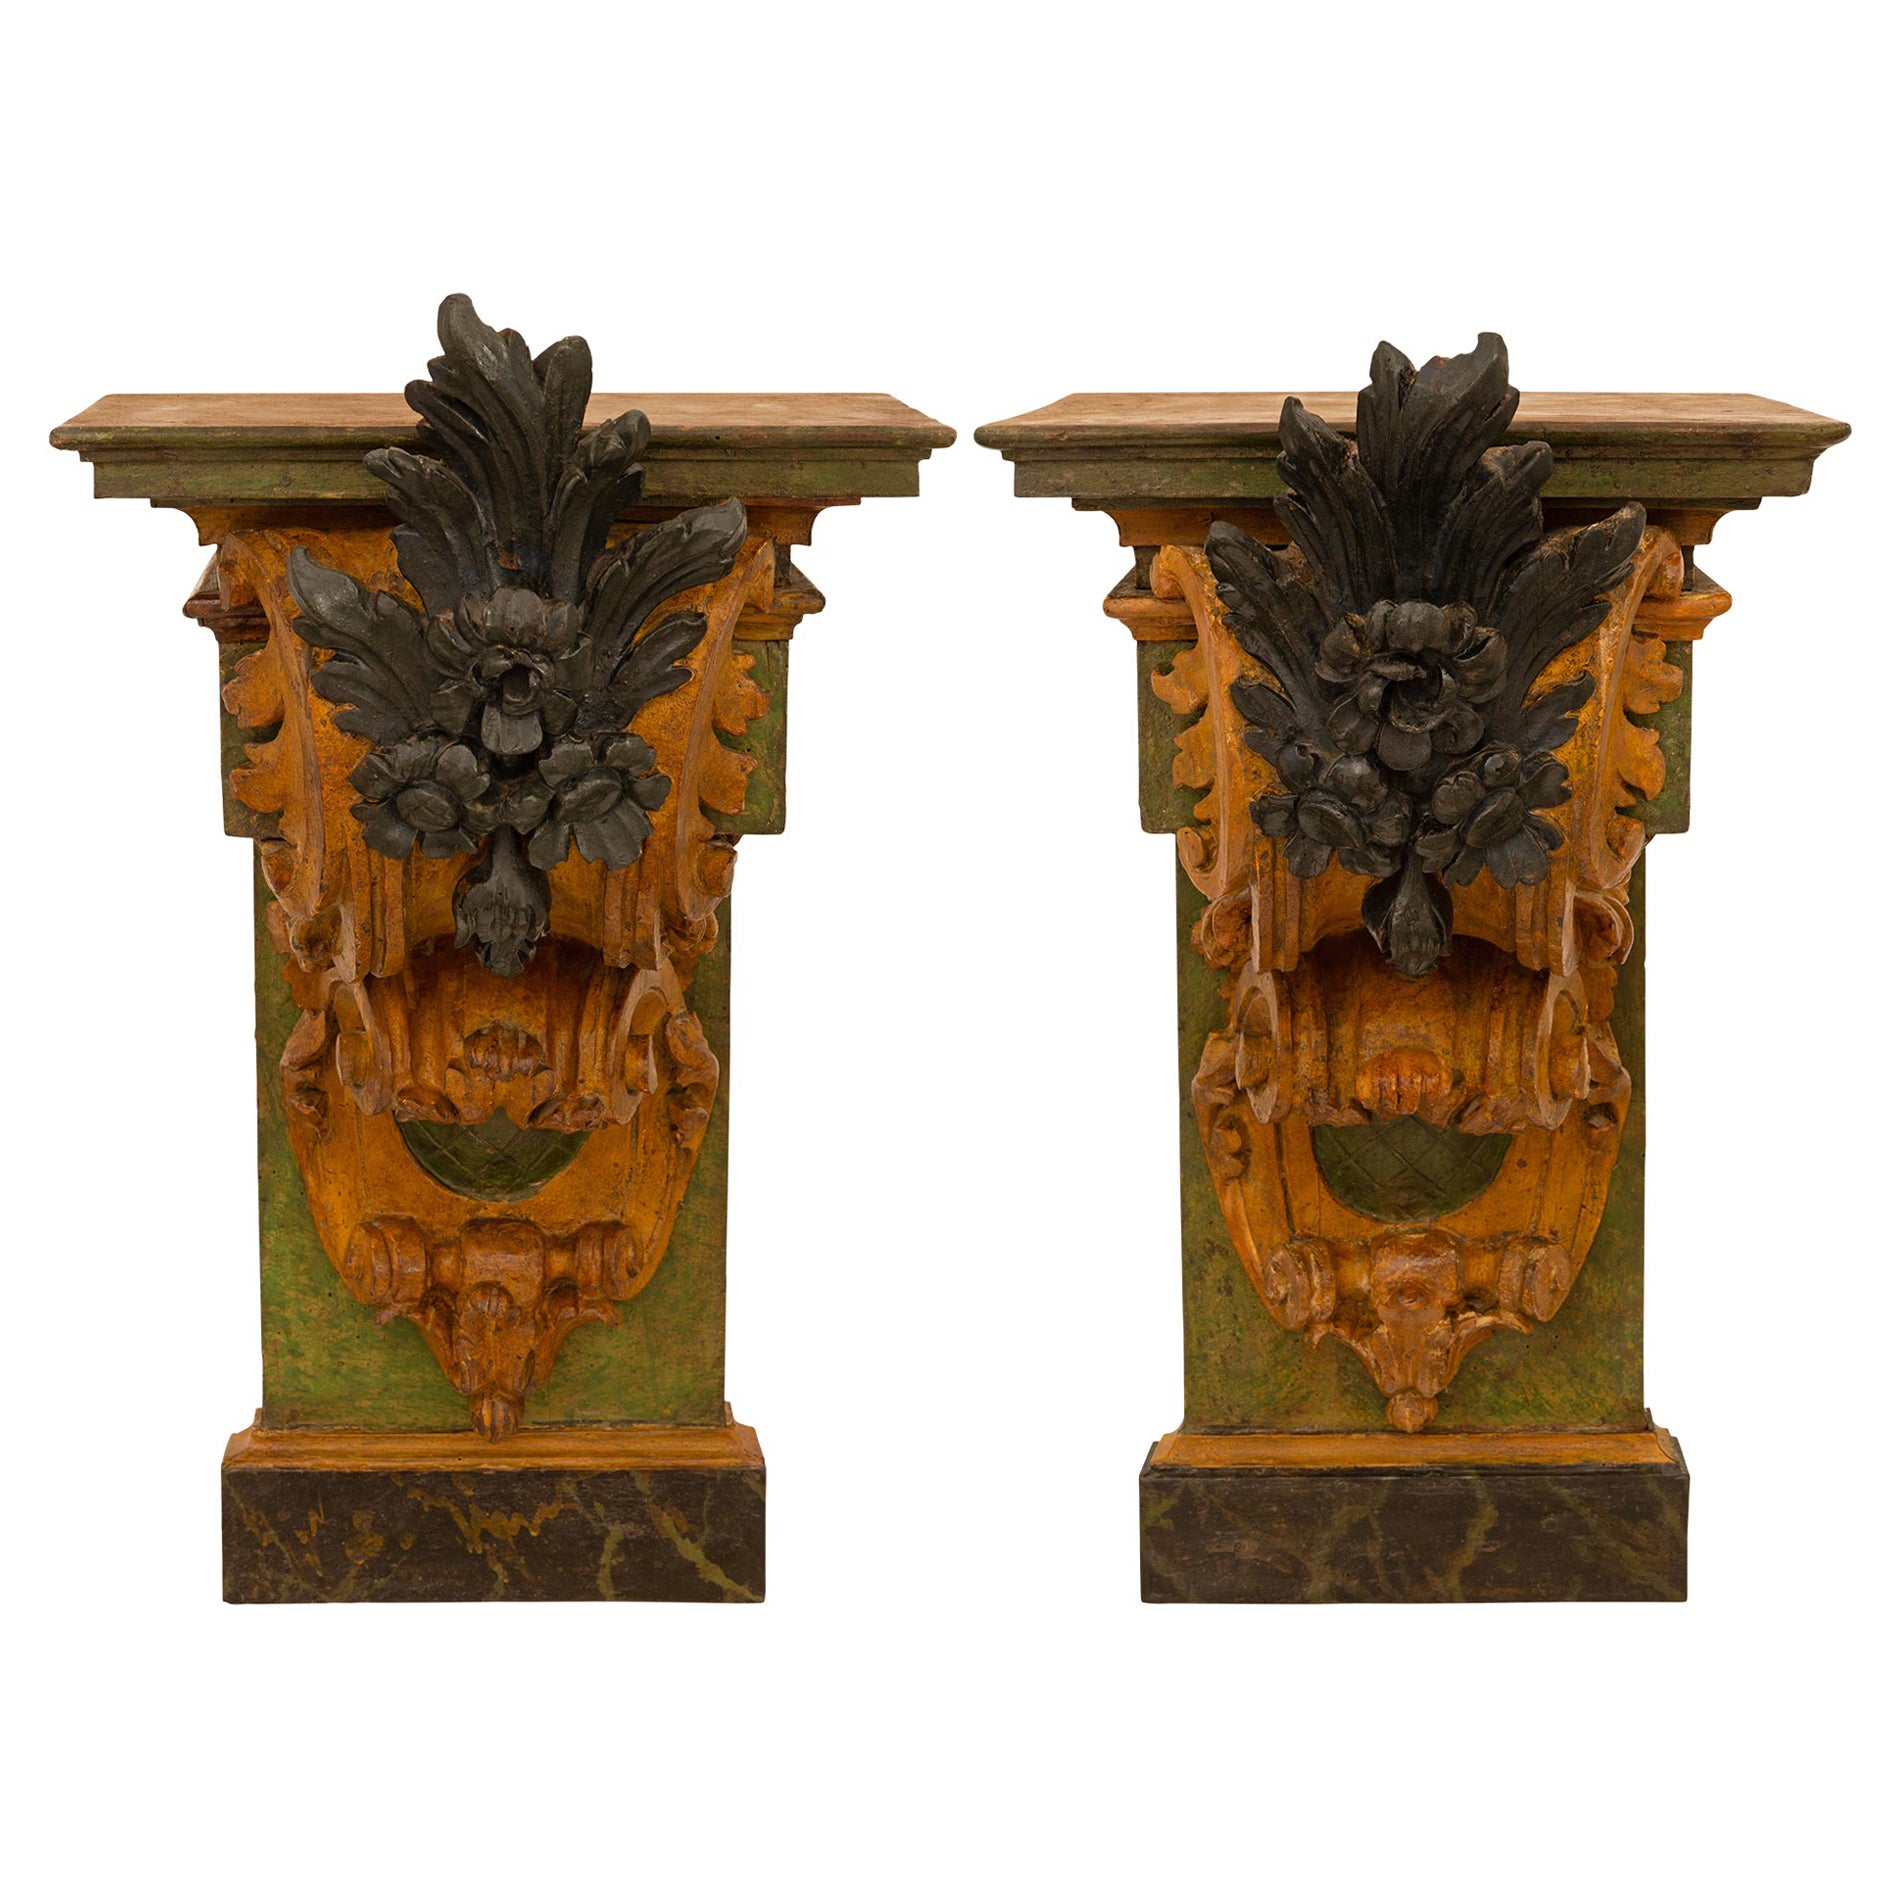 Pair Of Italian 18th Century Baroque St. Patinated Wood &Giltwood Wall Brackets For Sale